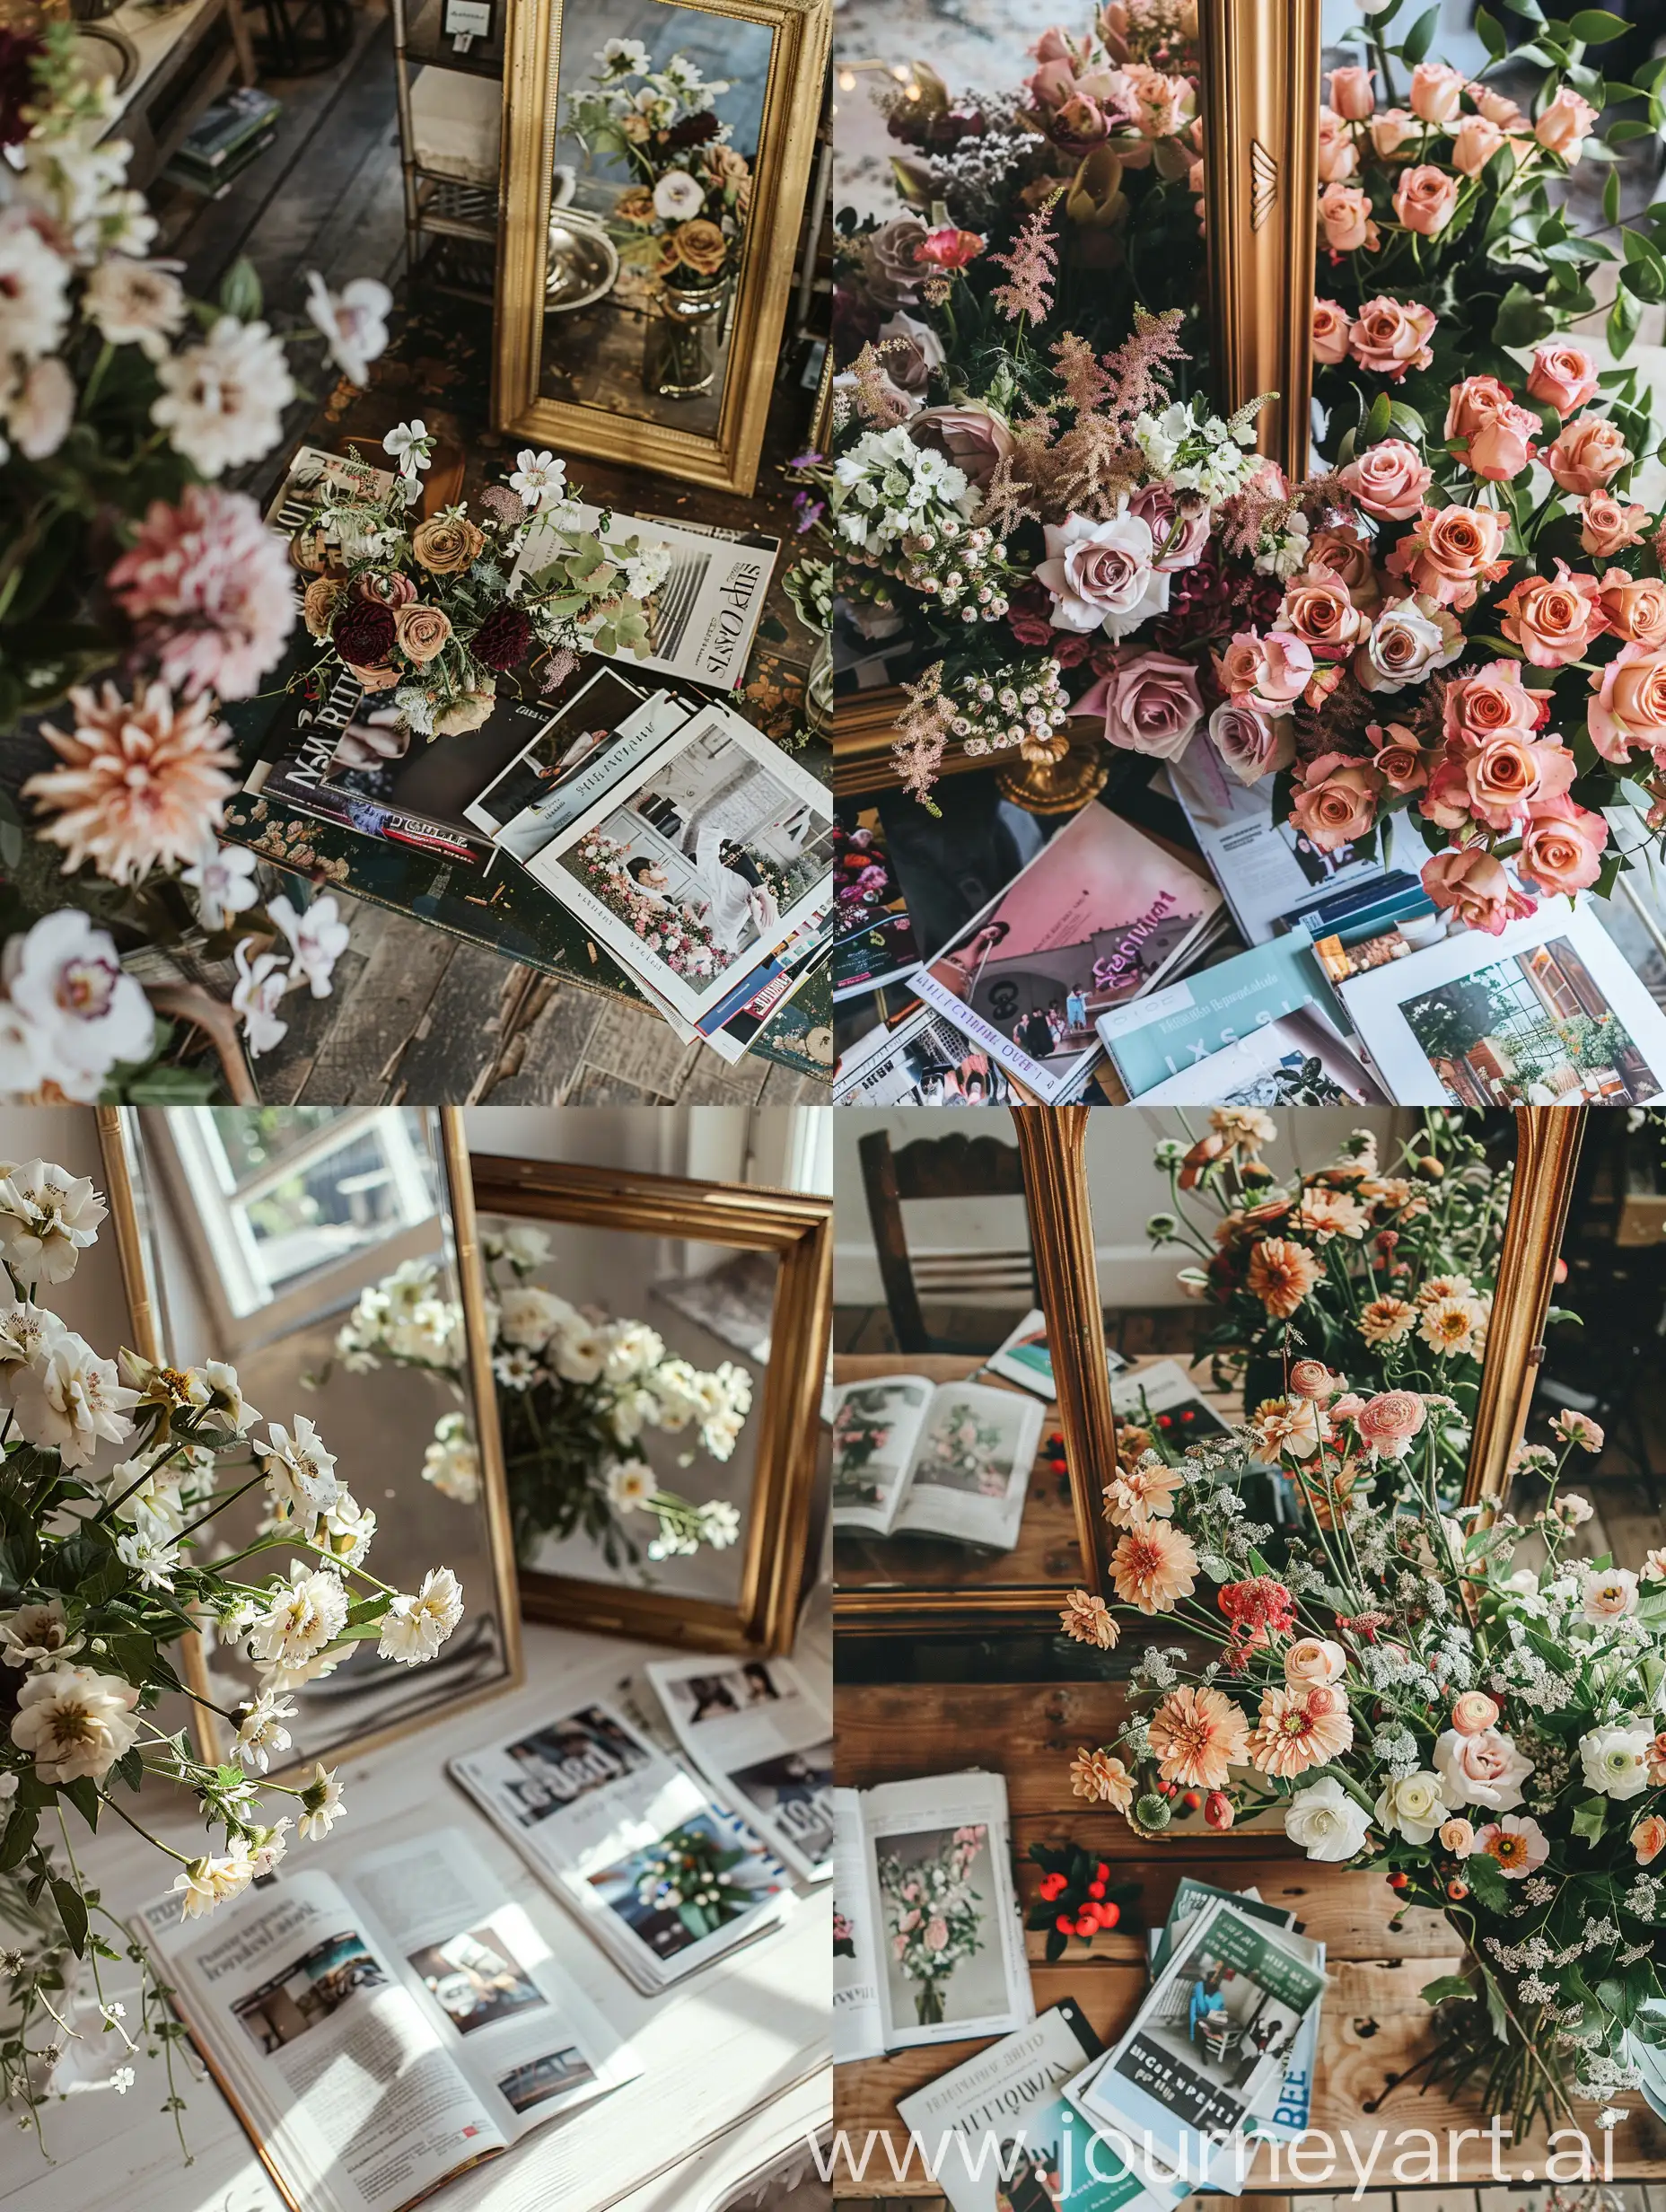 Tabletop-Still-Life-with-Flowers-Magazines-and-Mirror-in-Golden-Frame